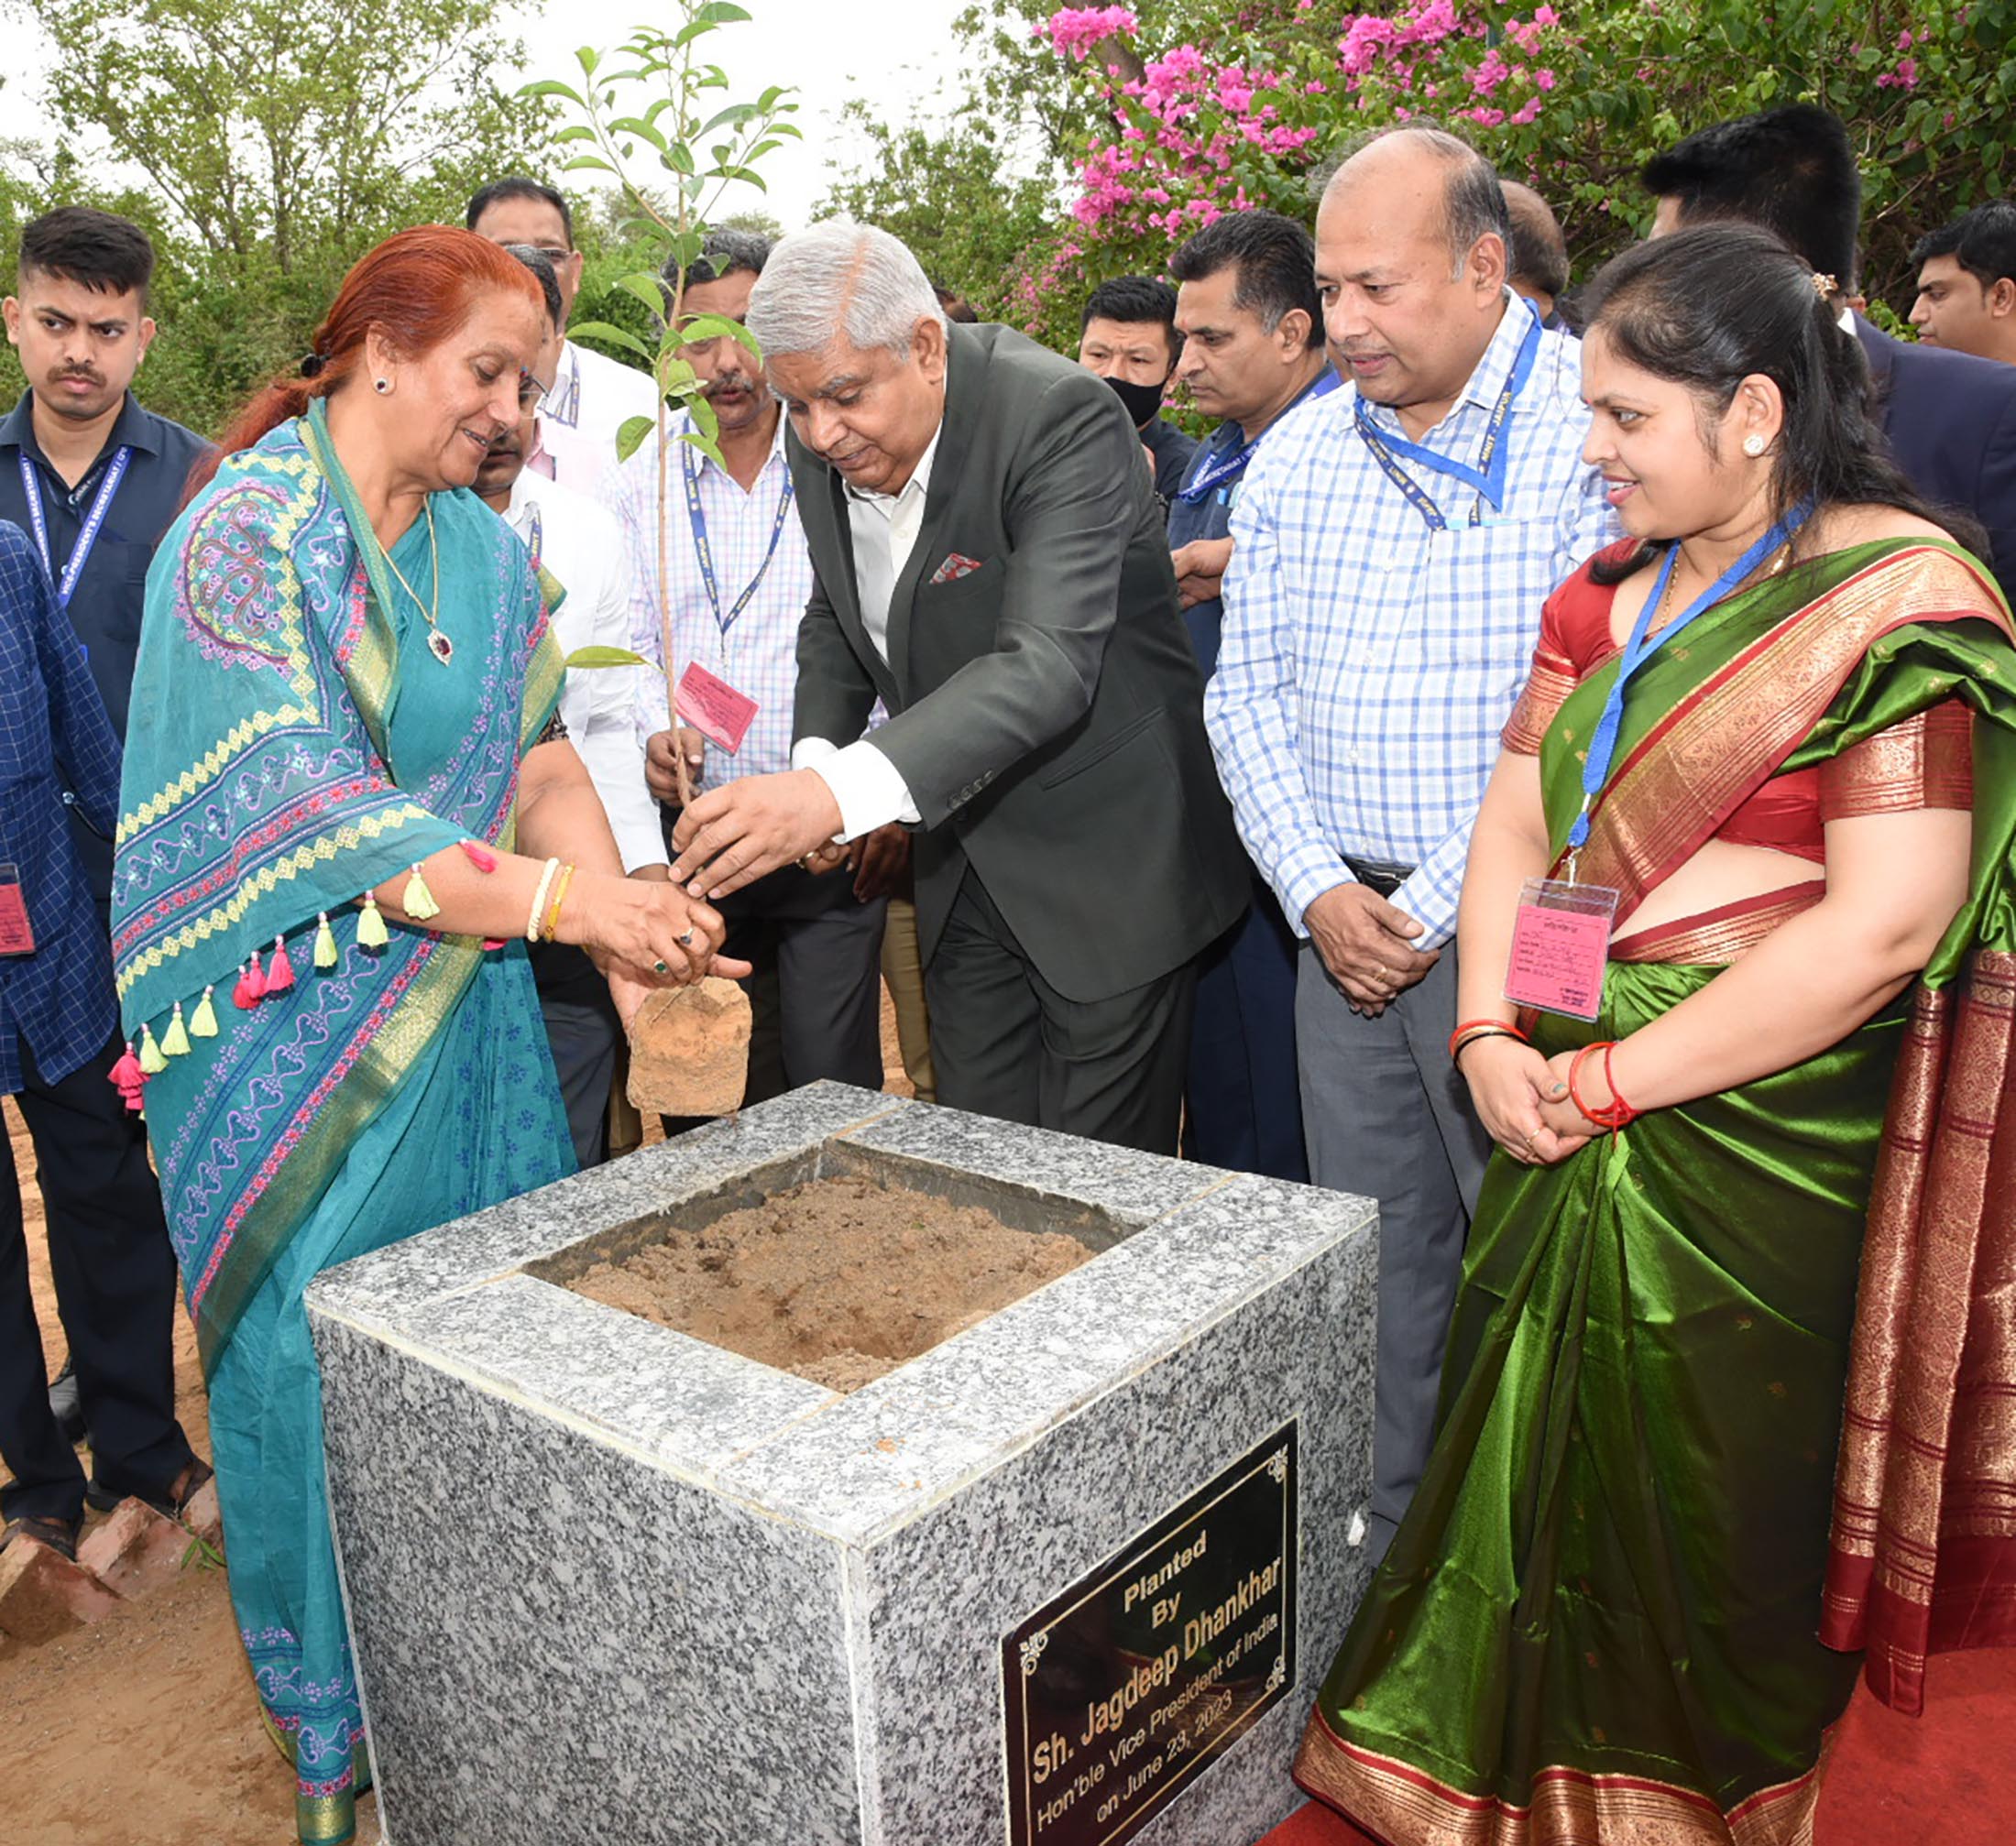 The Vice President, Shri Jagdeep Dhankhar and Dr. Sudesh Dhankhar planting a sapling at the premises of Malaviya National Institute of Technology in Jaipur, Rajasthan on June 23, 2023.